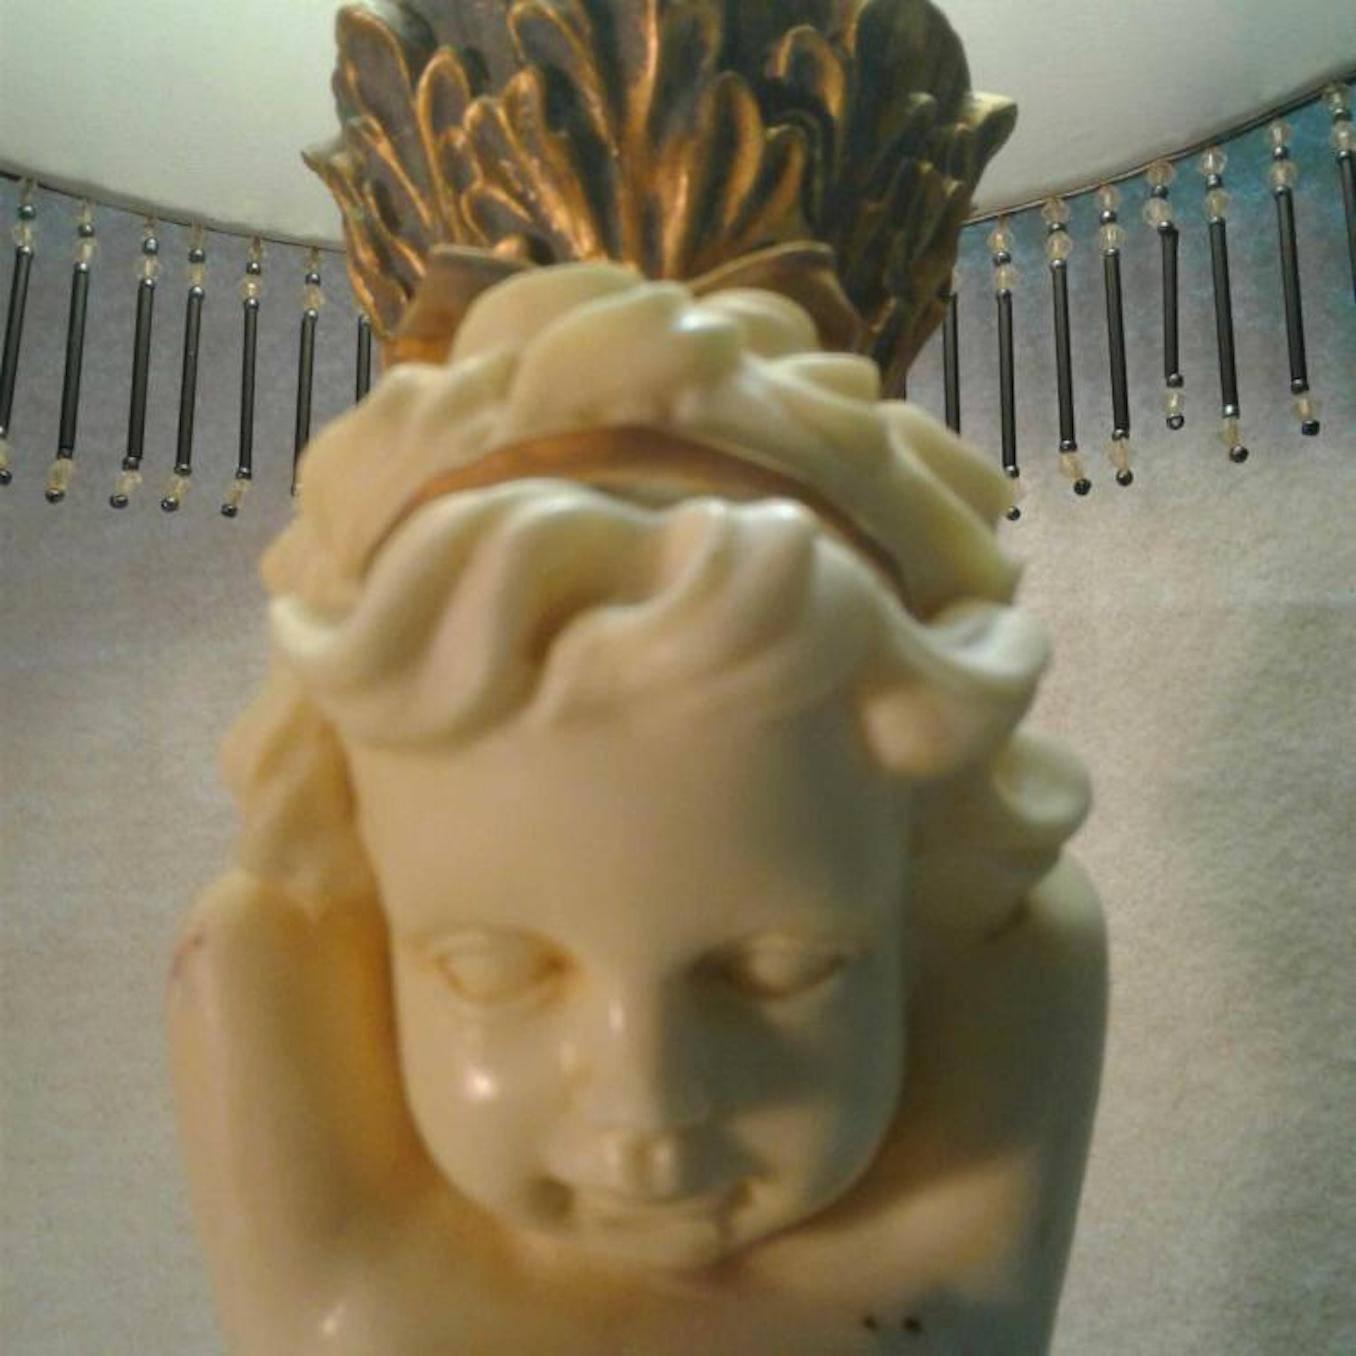 Cherub table lamp

Stamped J. Upton. Lamp with a two cherub features ornate brass colored details appears to be a made of resin. The lampshade is a gray Victorian style and has black tassels with clear Â beads.